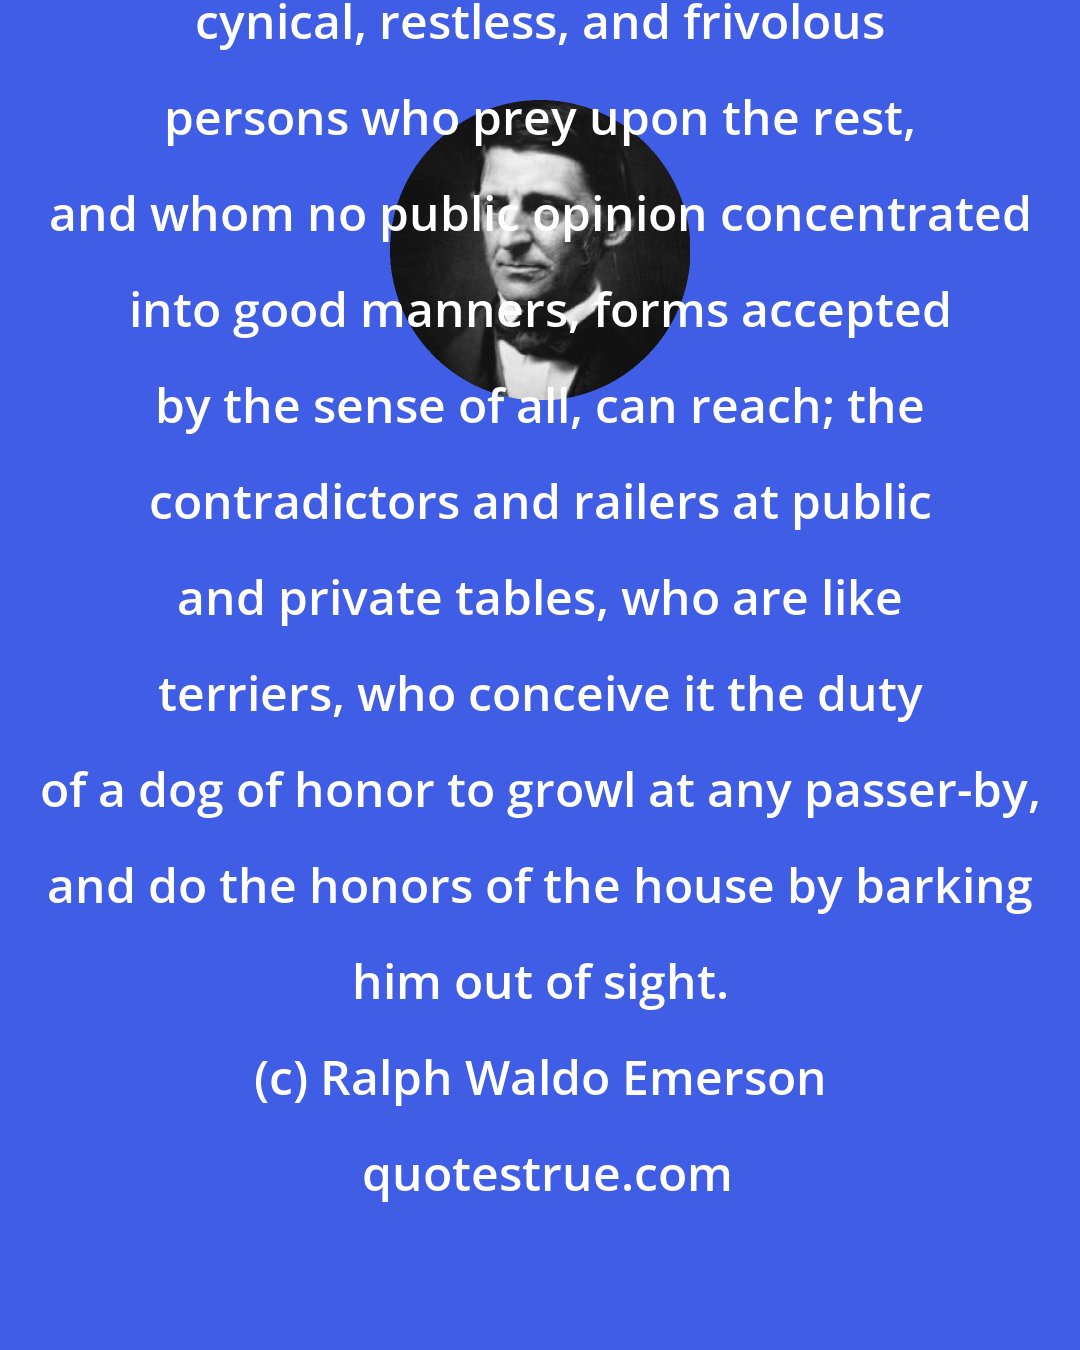 Ralph Waldo Emerson: Society is infected with rude, cynical, restless, and frivolous persons who prey upon the rest, and whom no public opinion concentrated into good manners, forms accepted by the sense of all, can reach; the contradictors and railers at public and private tables, who are like terriers, who conceive it the duty of a dog of honor to growl at any passer-by, and do the honors of the house by barking him out of sight.